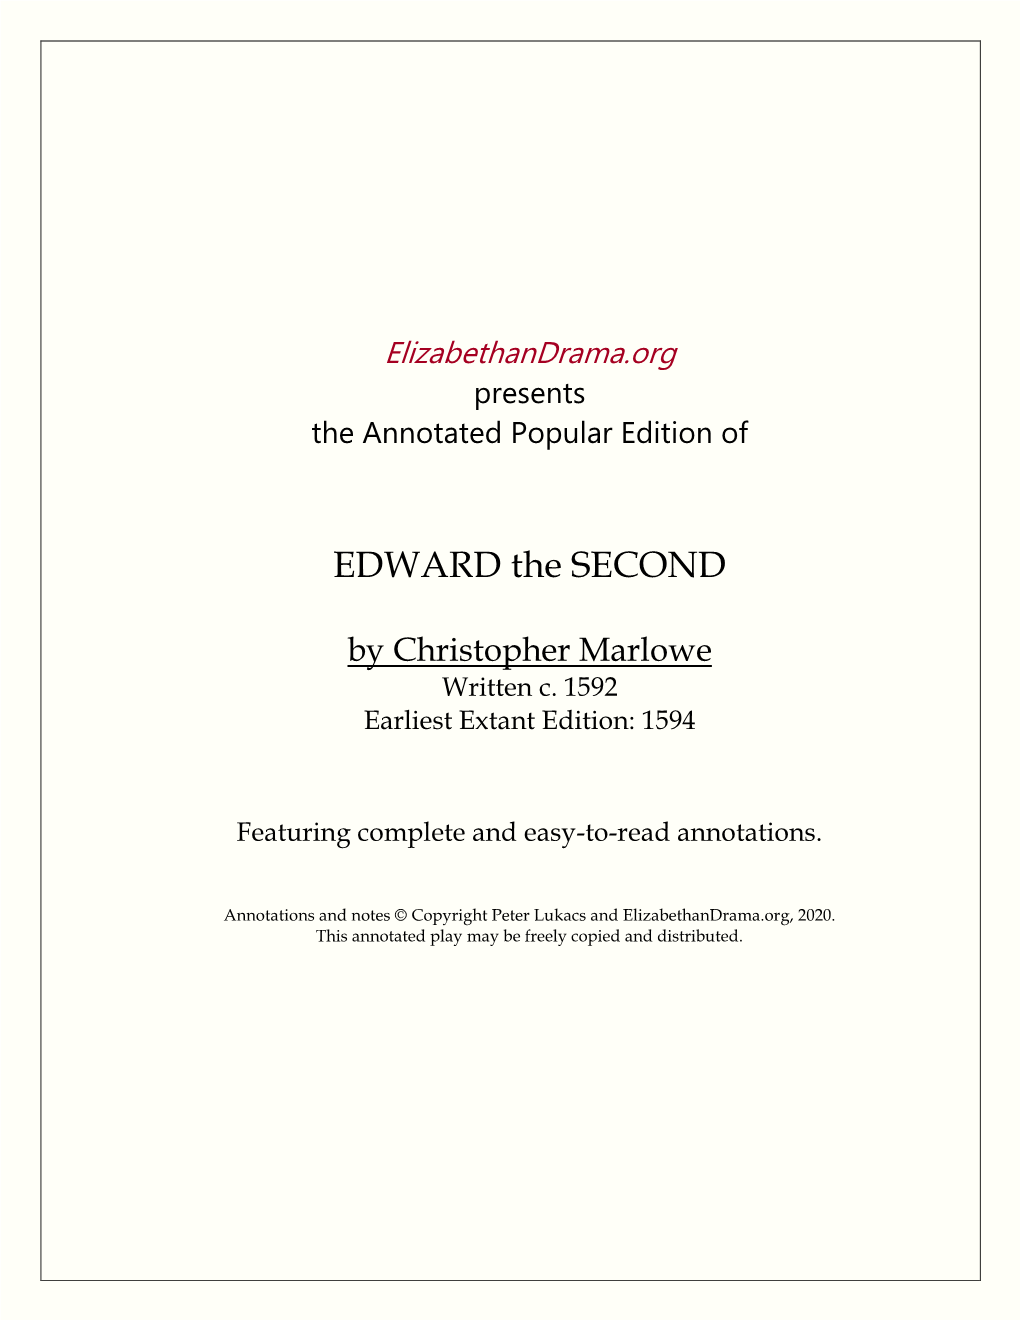 EDWARD the SECOND